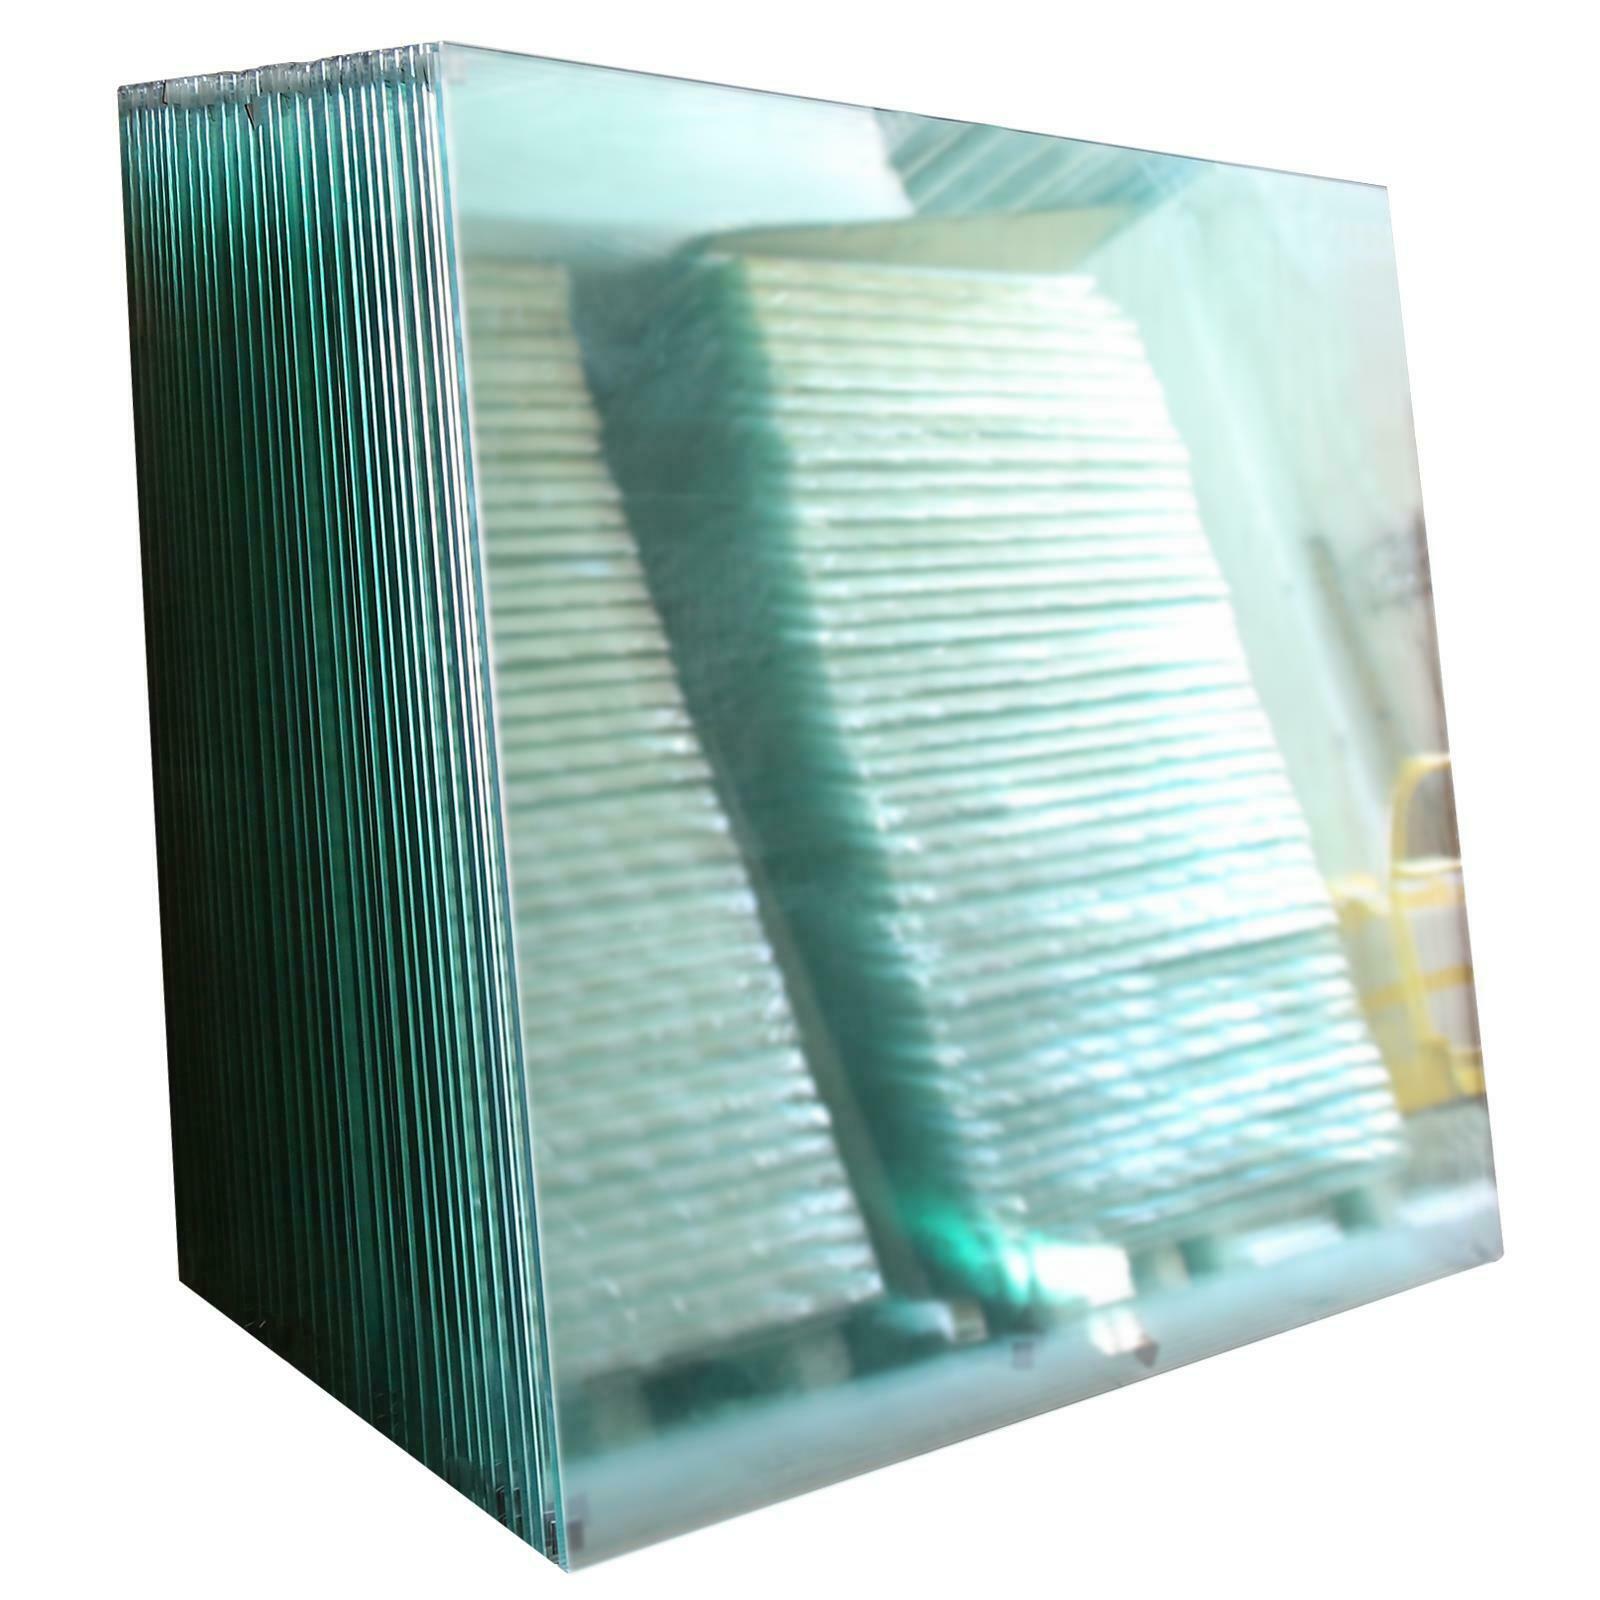 100cm x 60cm CE Certified 10mm Clear Toughened Safety Glass